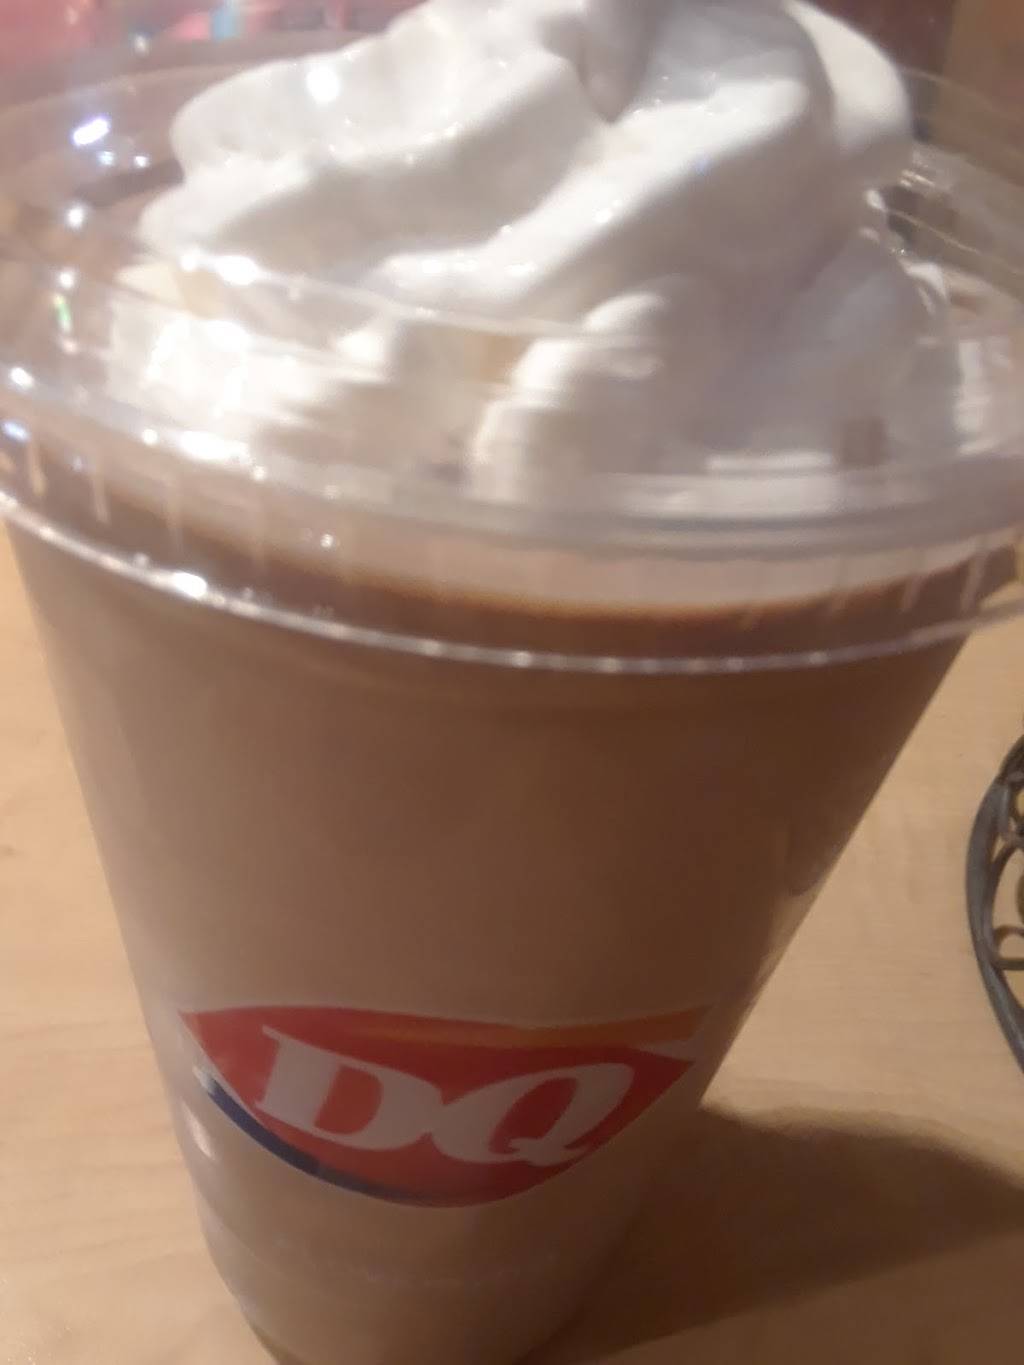 Dairy Queen Grill & Chill | restaurant | 519 S Broadway, Salem, IL 62881, USA | 6185480271 OR +1 618-548-0271